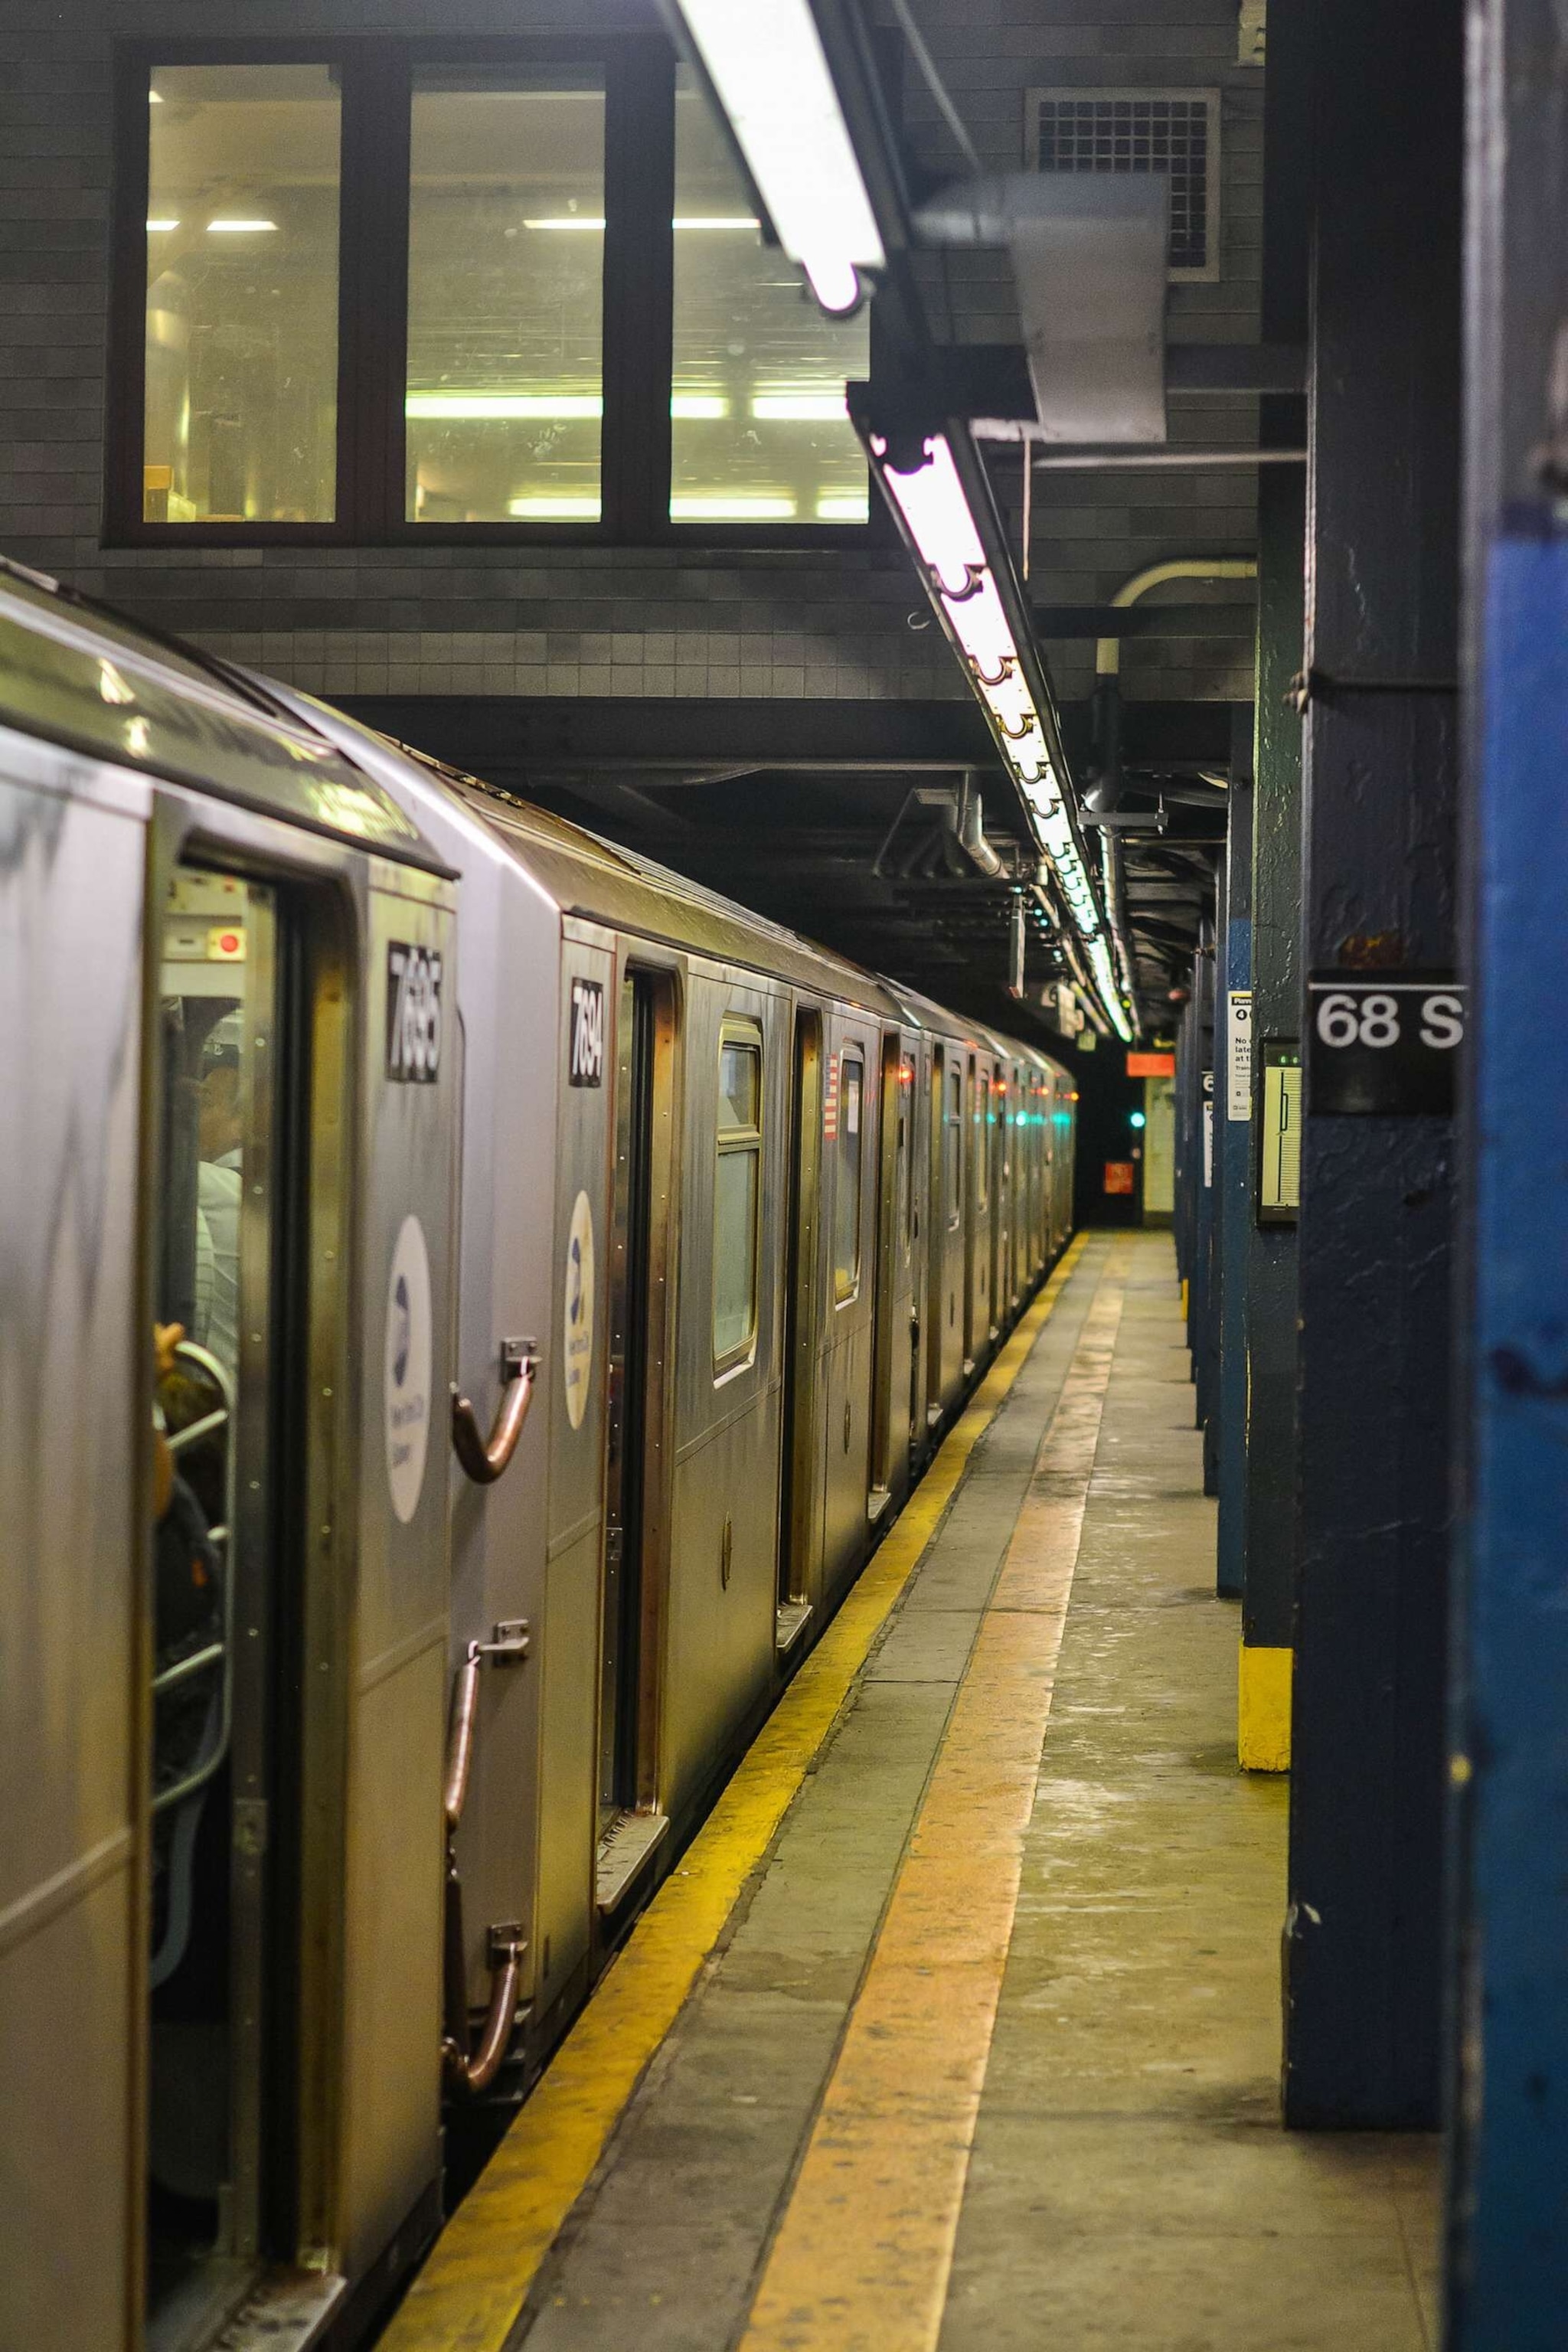 PHOTO: In this undated file photo, a 6 train pulls into the 68th street subway station in New York.